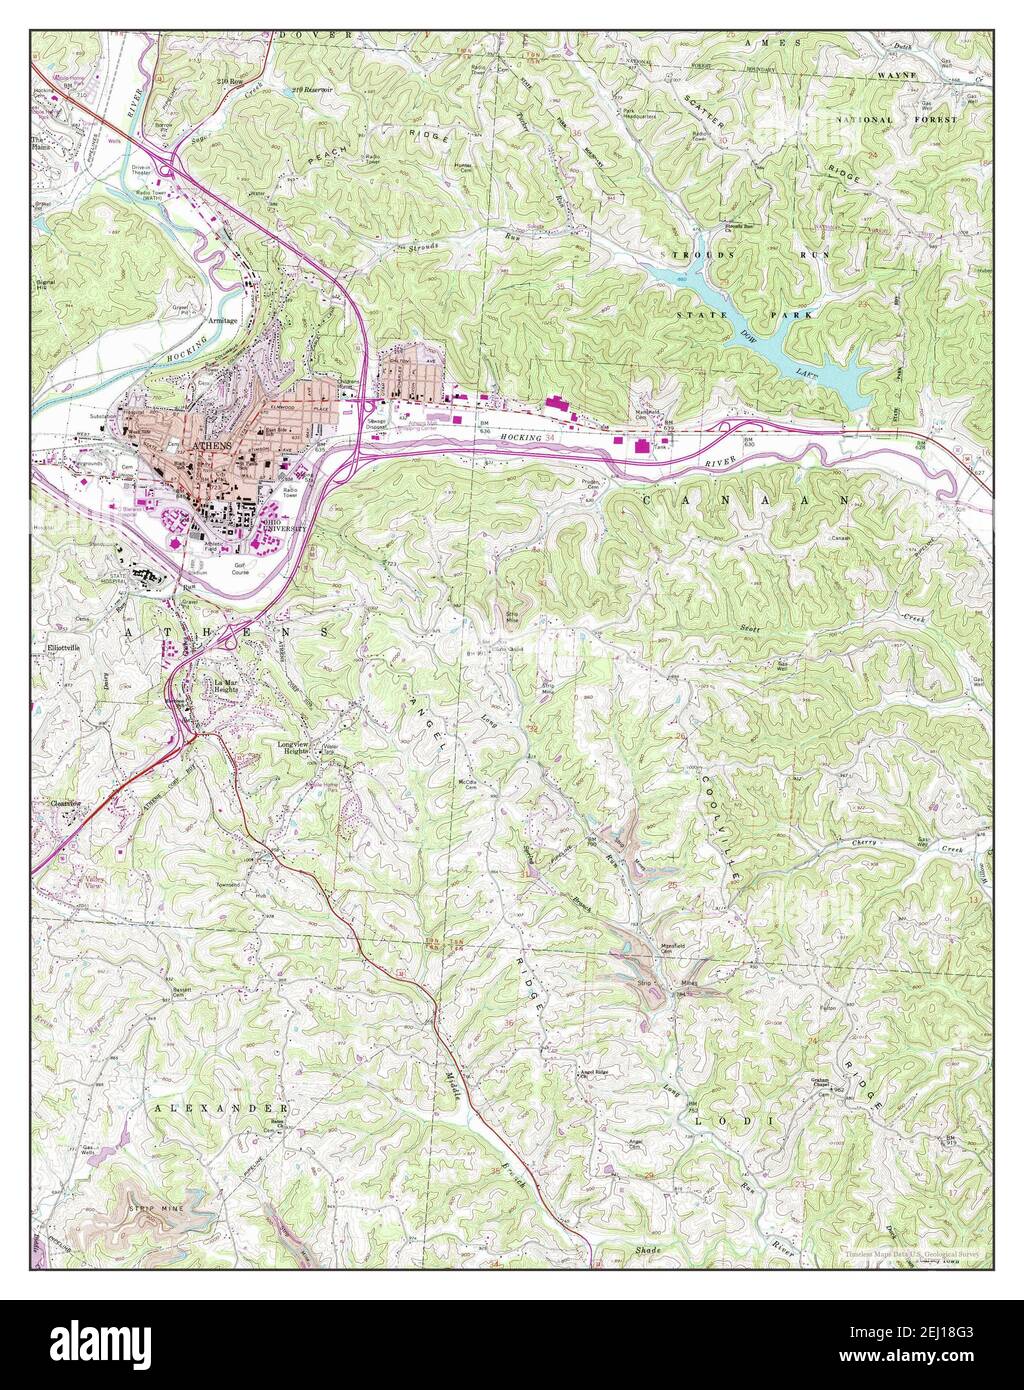 Athens, Ohio, map 1961, 1:24000, United States of America by Timeless Maps, data U.S. Geological Survey Stock Photo